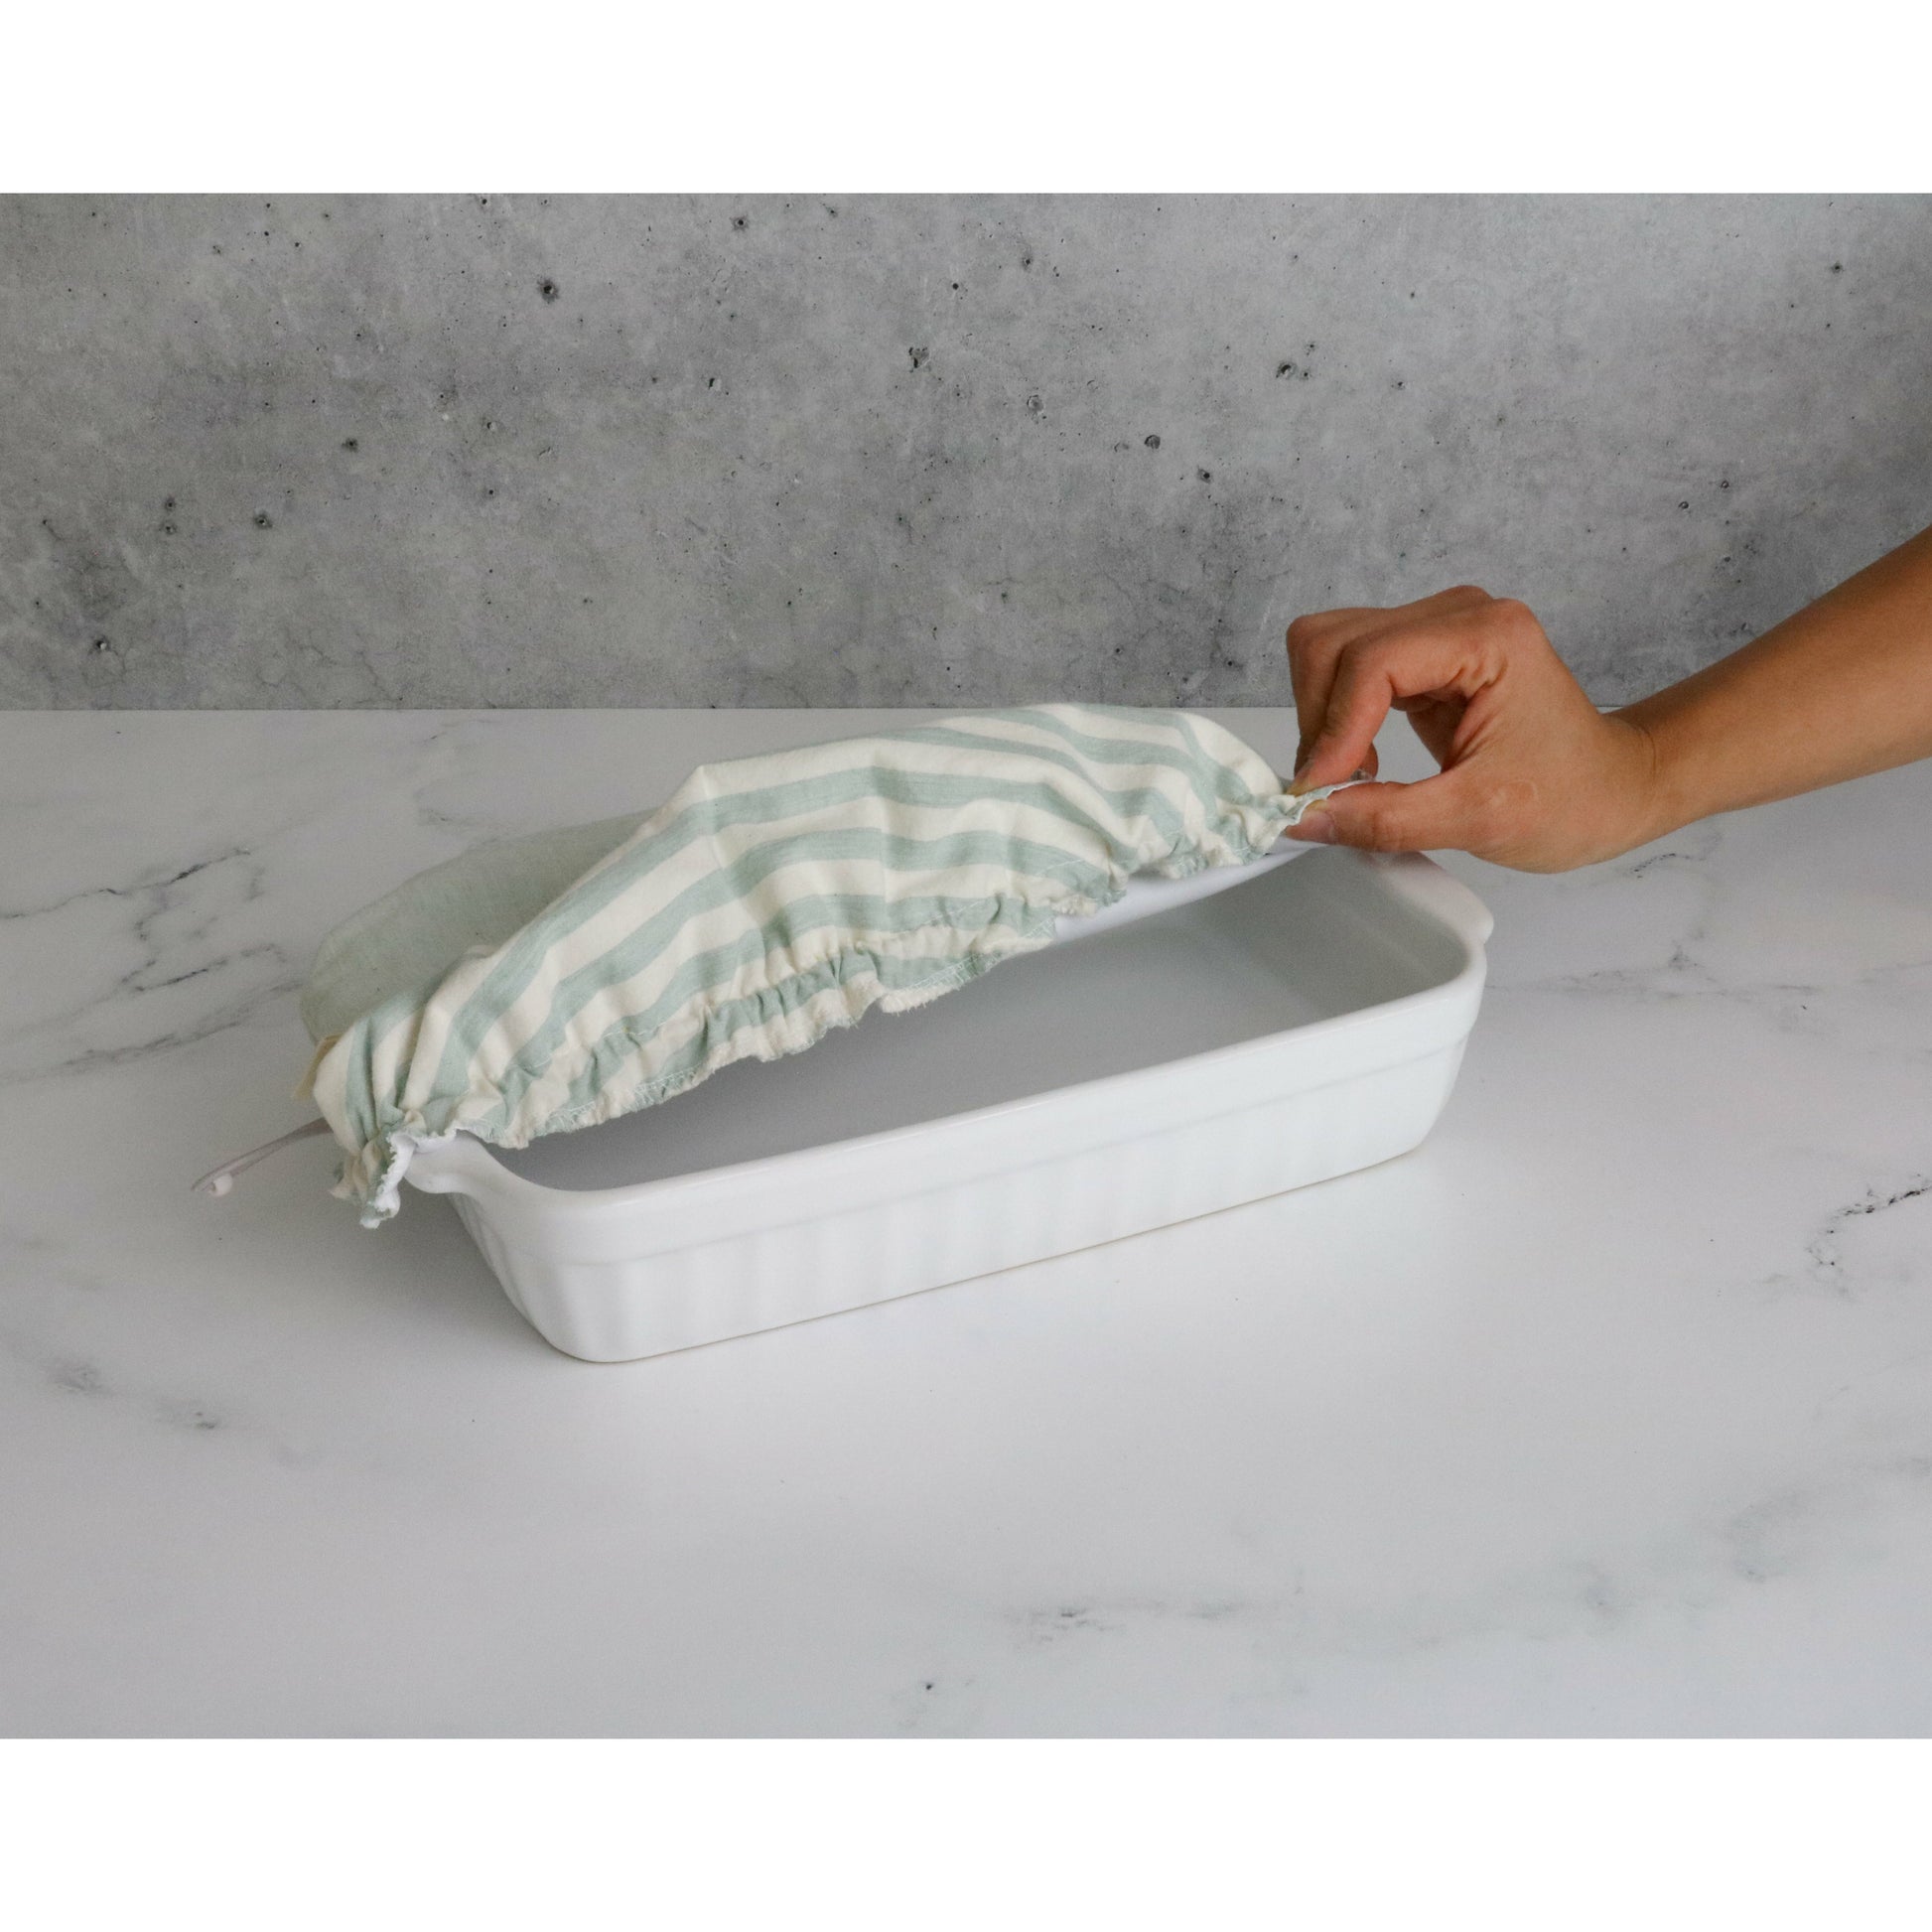 Elastic bowl covers, food container covers, stretch to fit food covers, saran wrap replacement